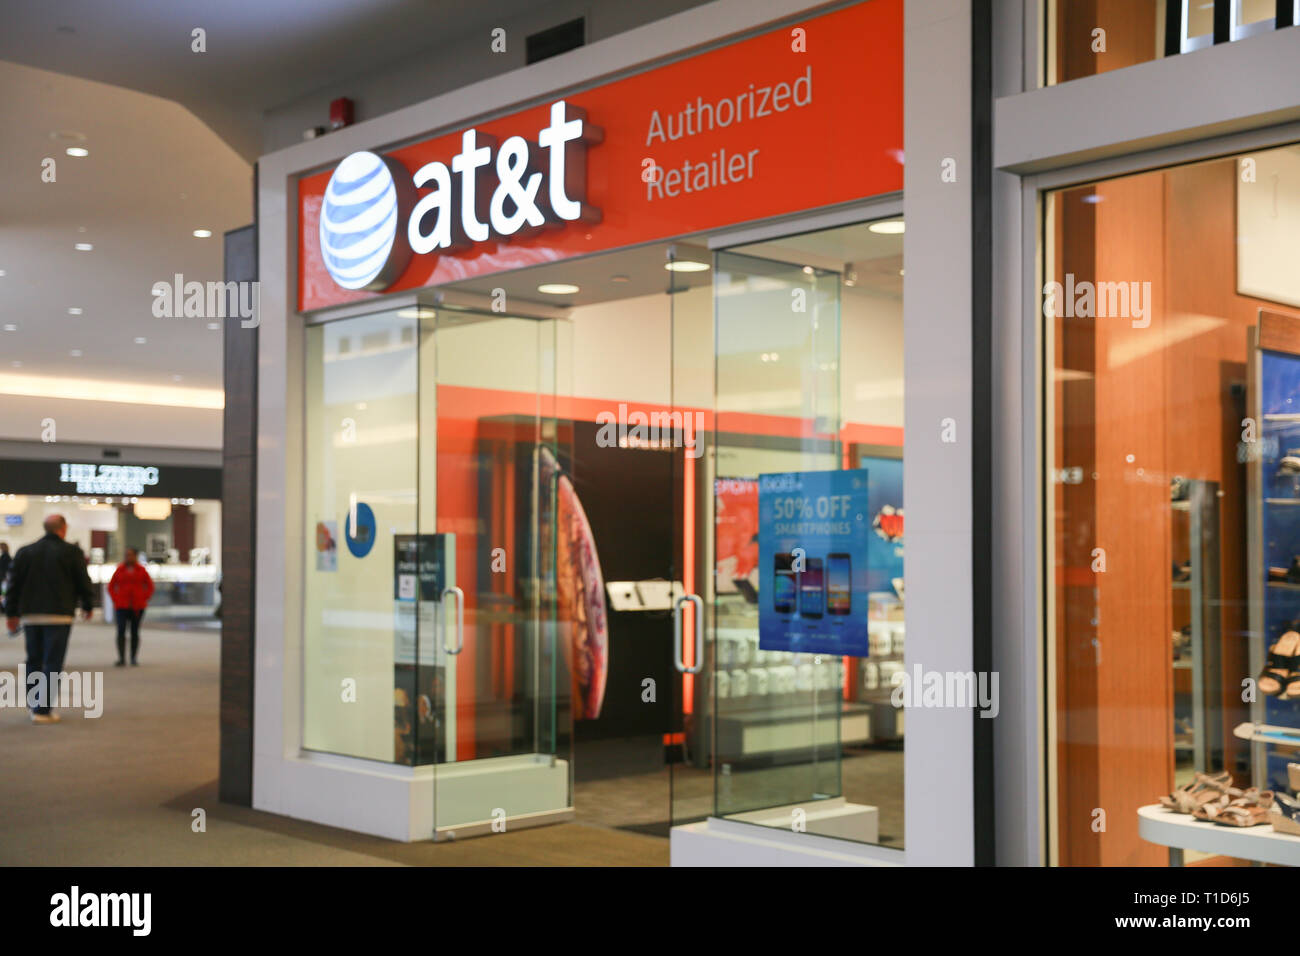 Lawrence Township New Jersey, February 24, 2019: AT&T Retail Store. AT&T Inc. is an American Telecommunications Corporation IX Stock Photo